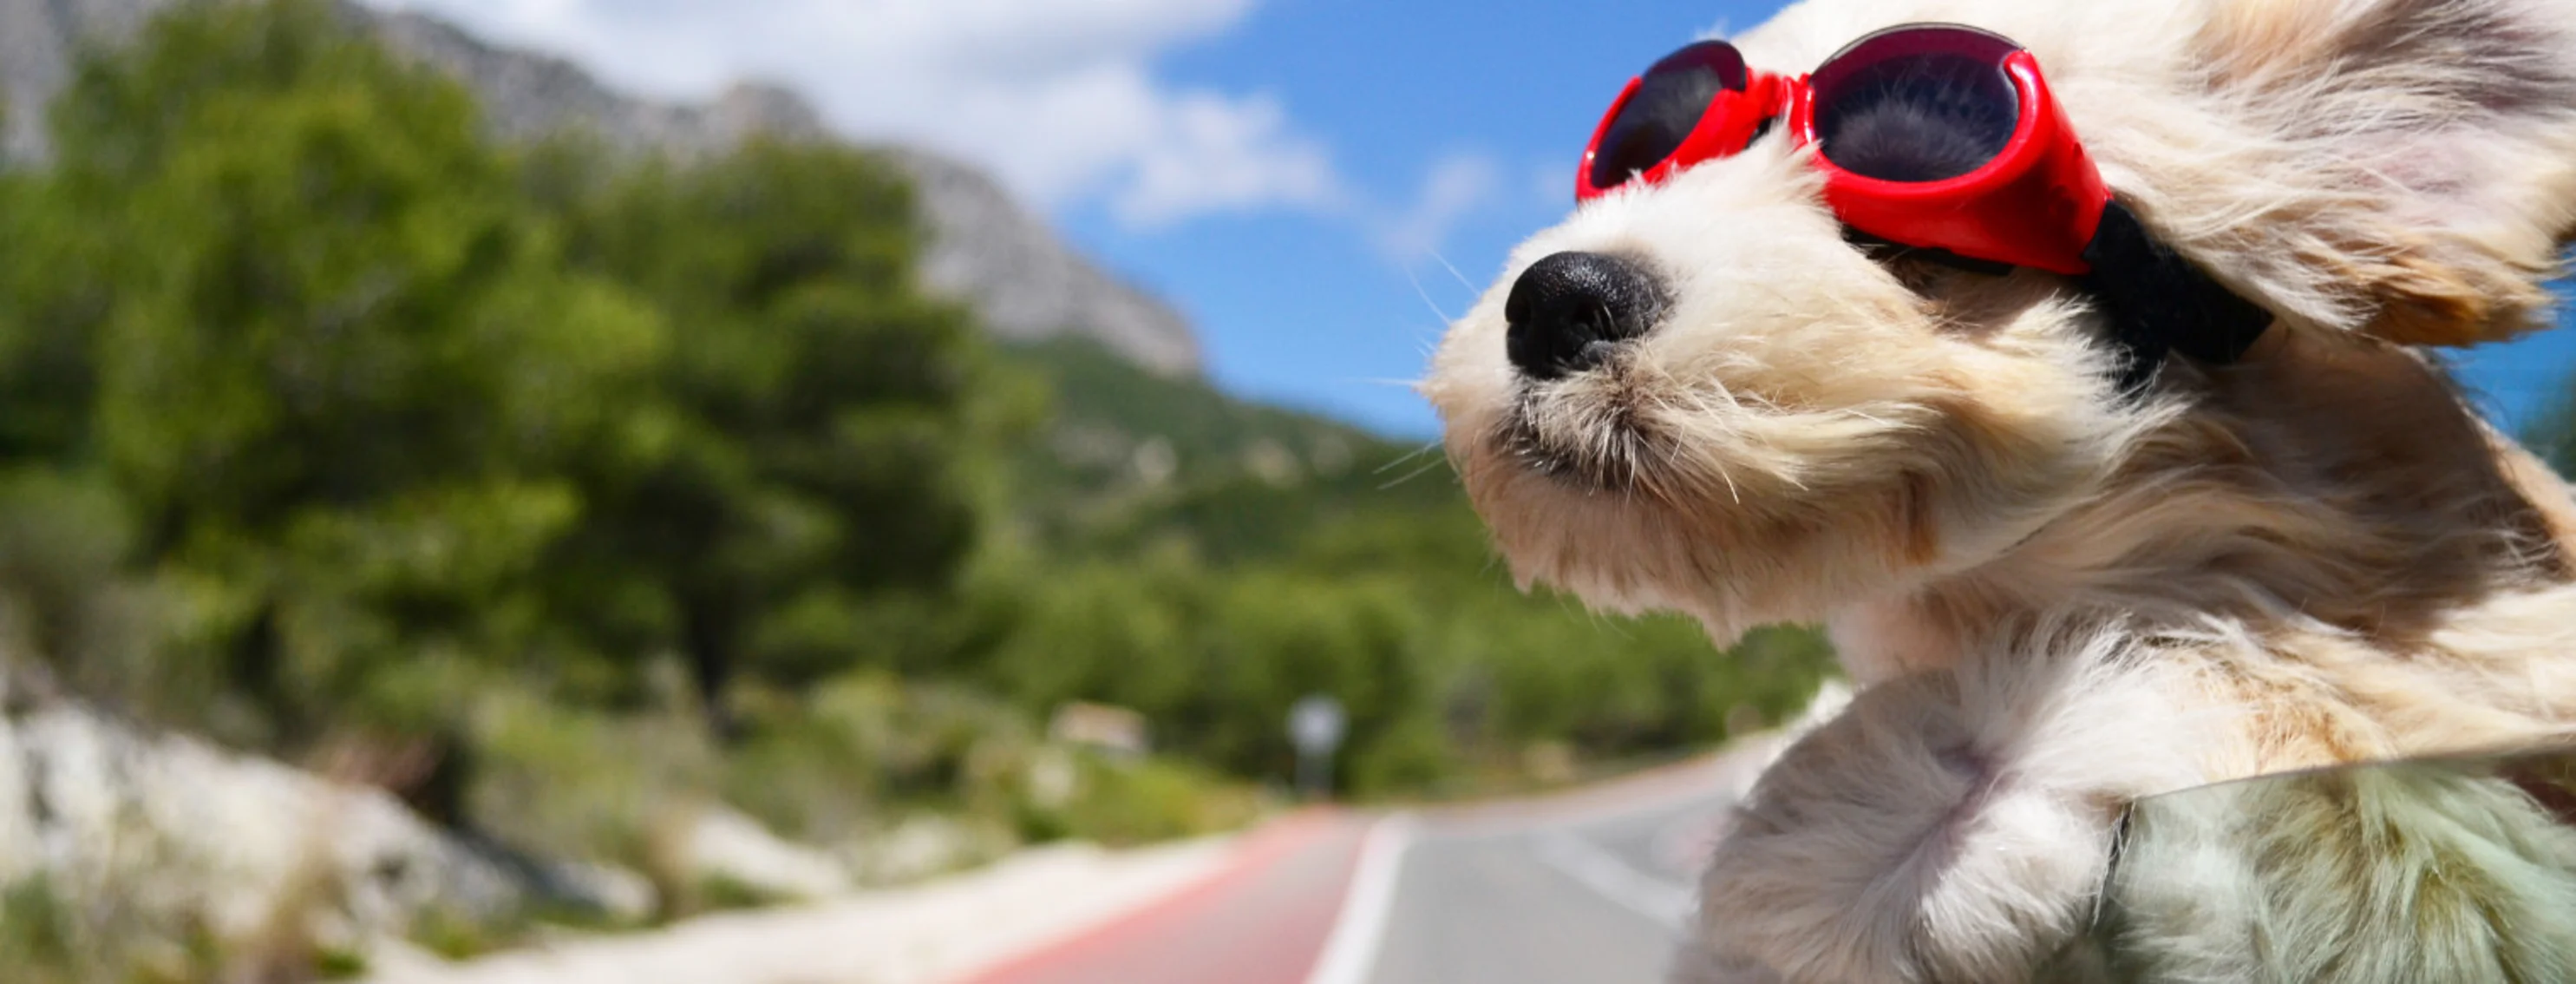 Fluffy cream colored dog outside car window with red sunglasses on going through mountains